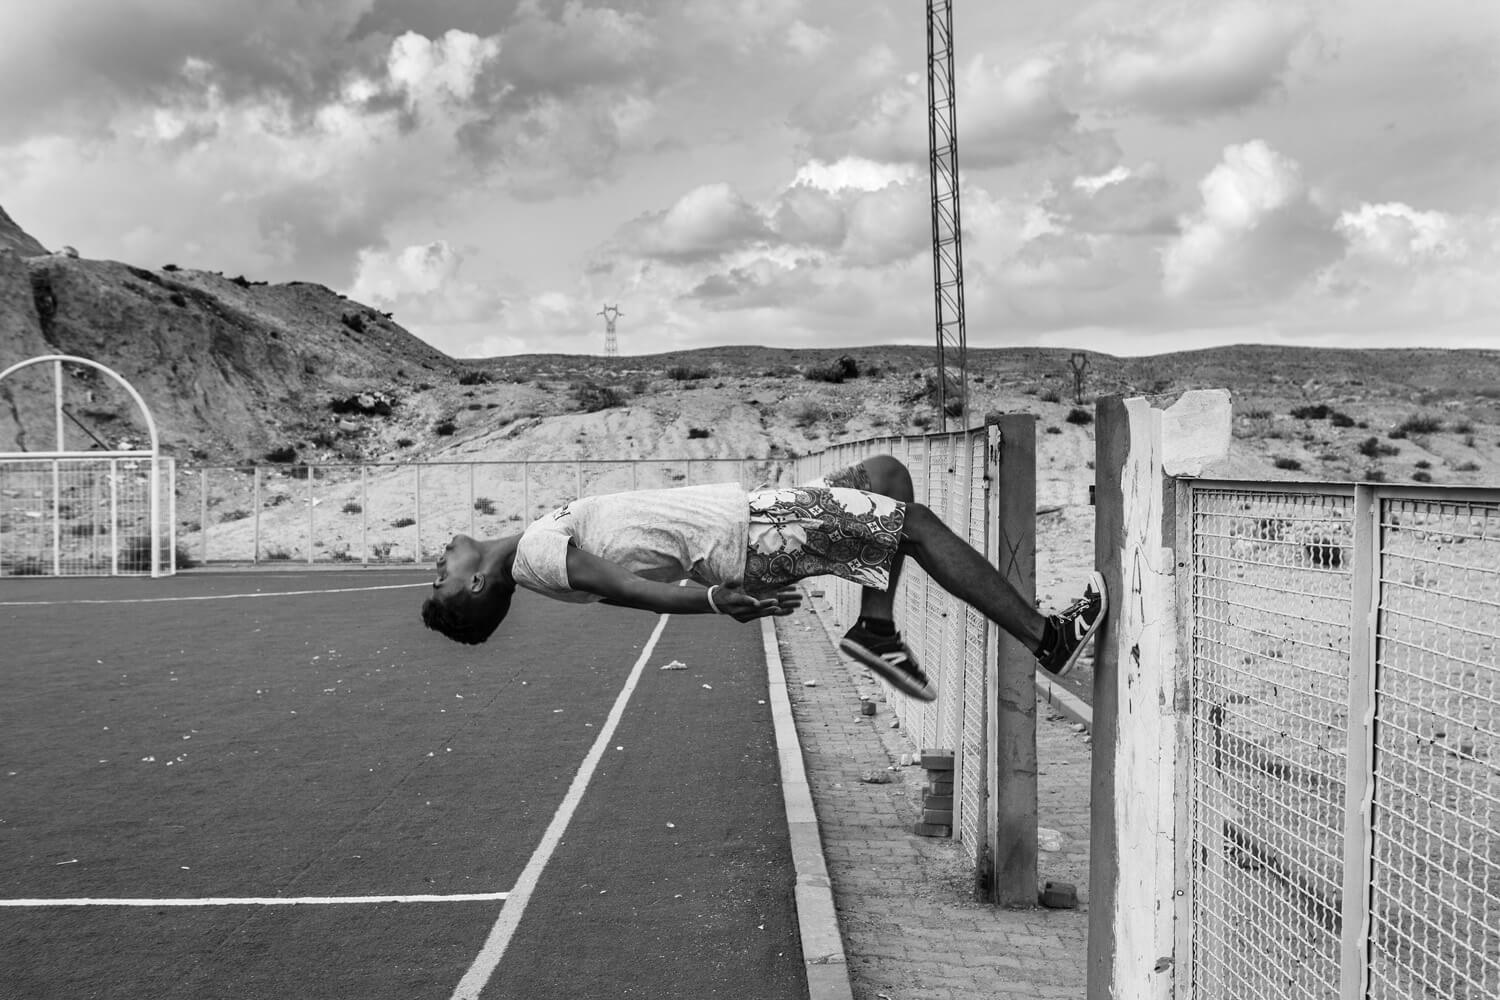 A person is frozen in time while performing a backflip off a fencepost making him look like he is performing a horizontal, blending athleticism with the stark landscape of a deserted playground.